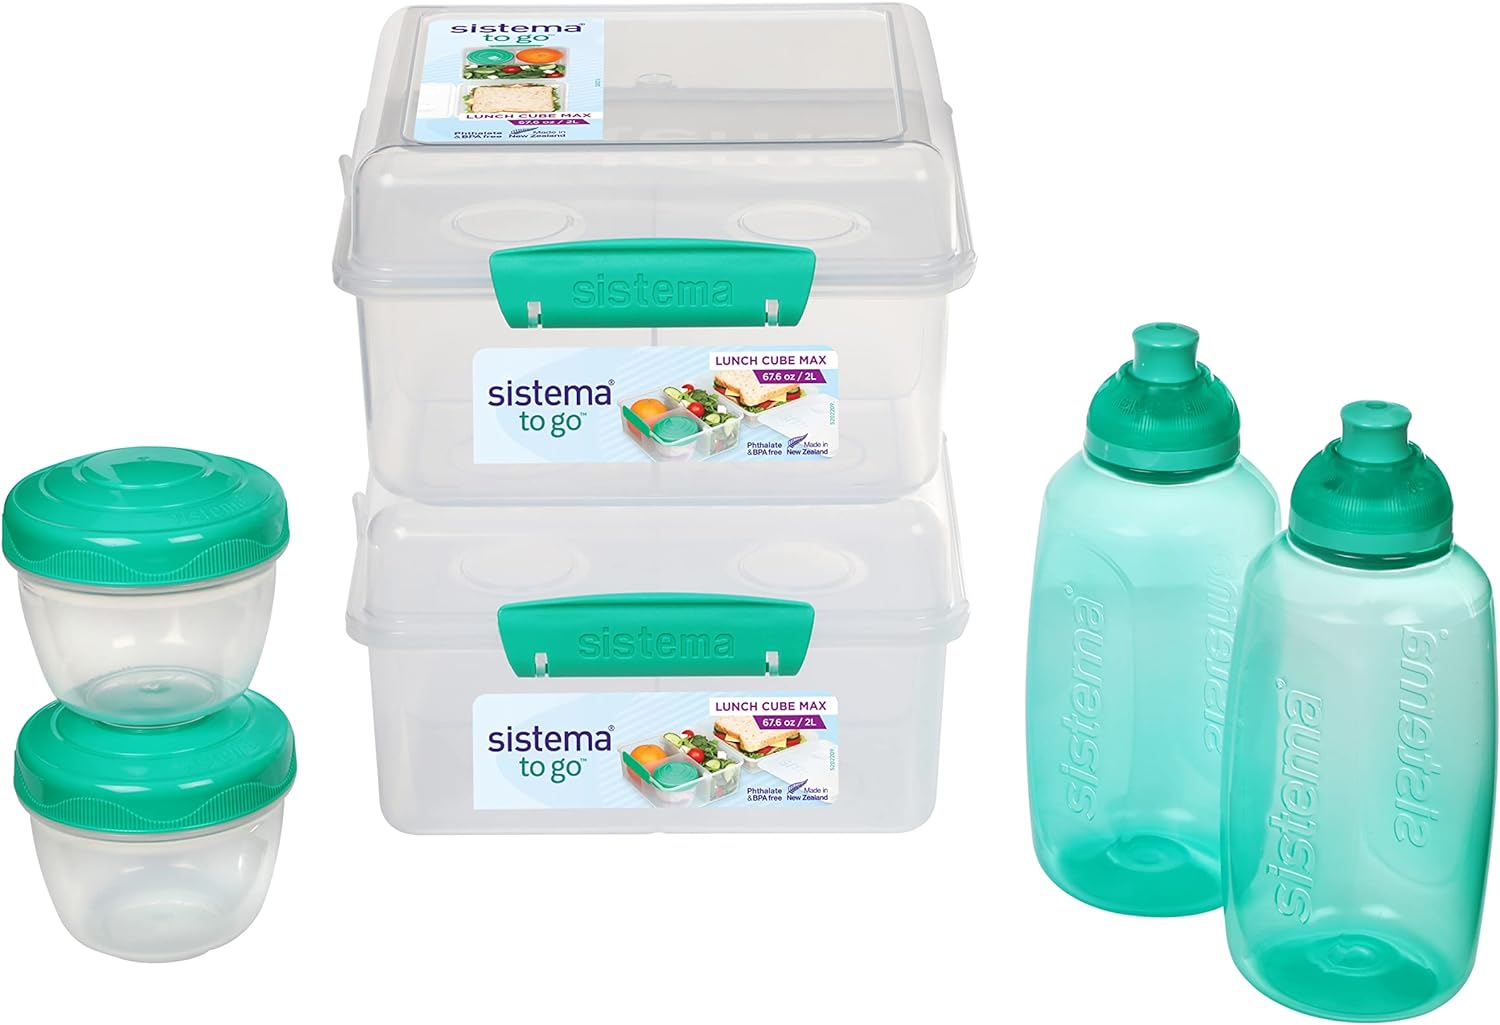 Sistema Lunch Containers Bento Box with Condiment and Sandwich Containers, 2 Water Bottles, Dishwasher Safe, Blue/Green